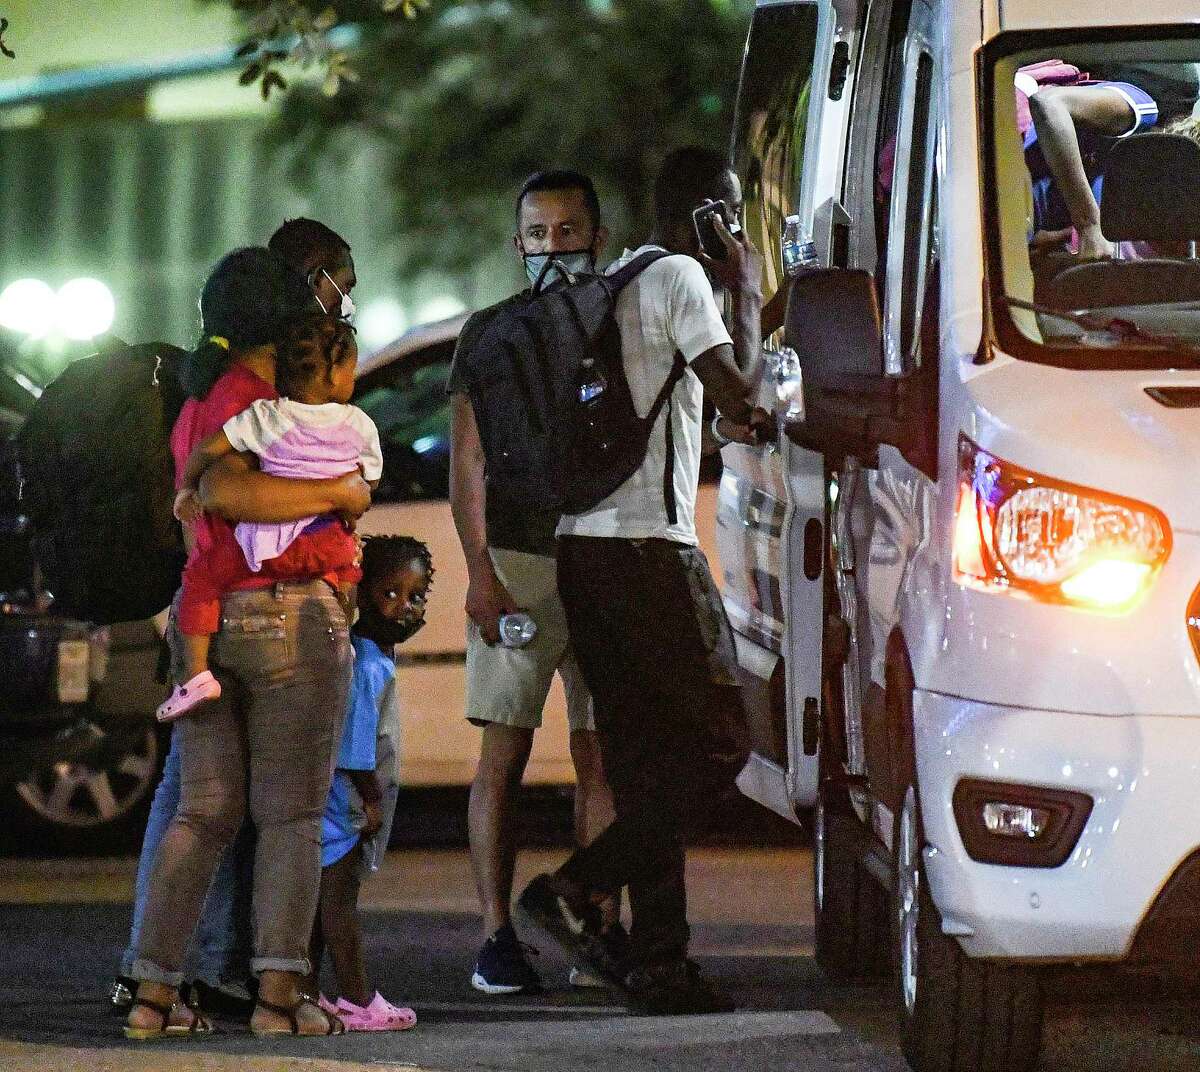 Readers say Haitian migrants, seen here at the downtown San Antonio bus station Monday, should have their pleas for asylum heard.